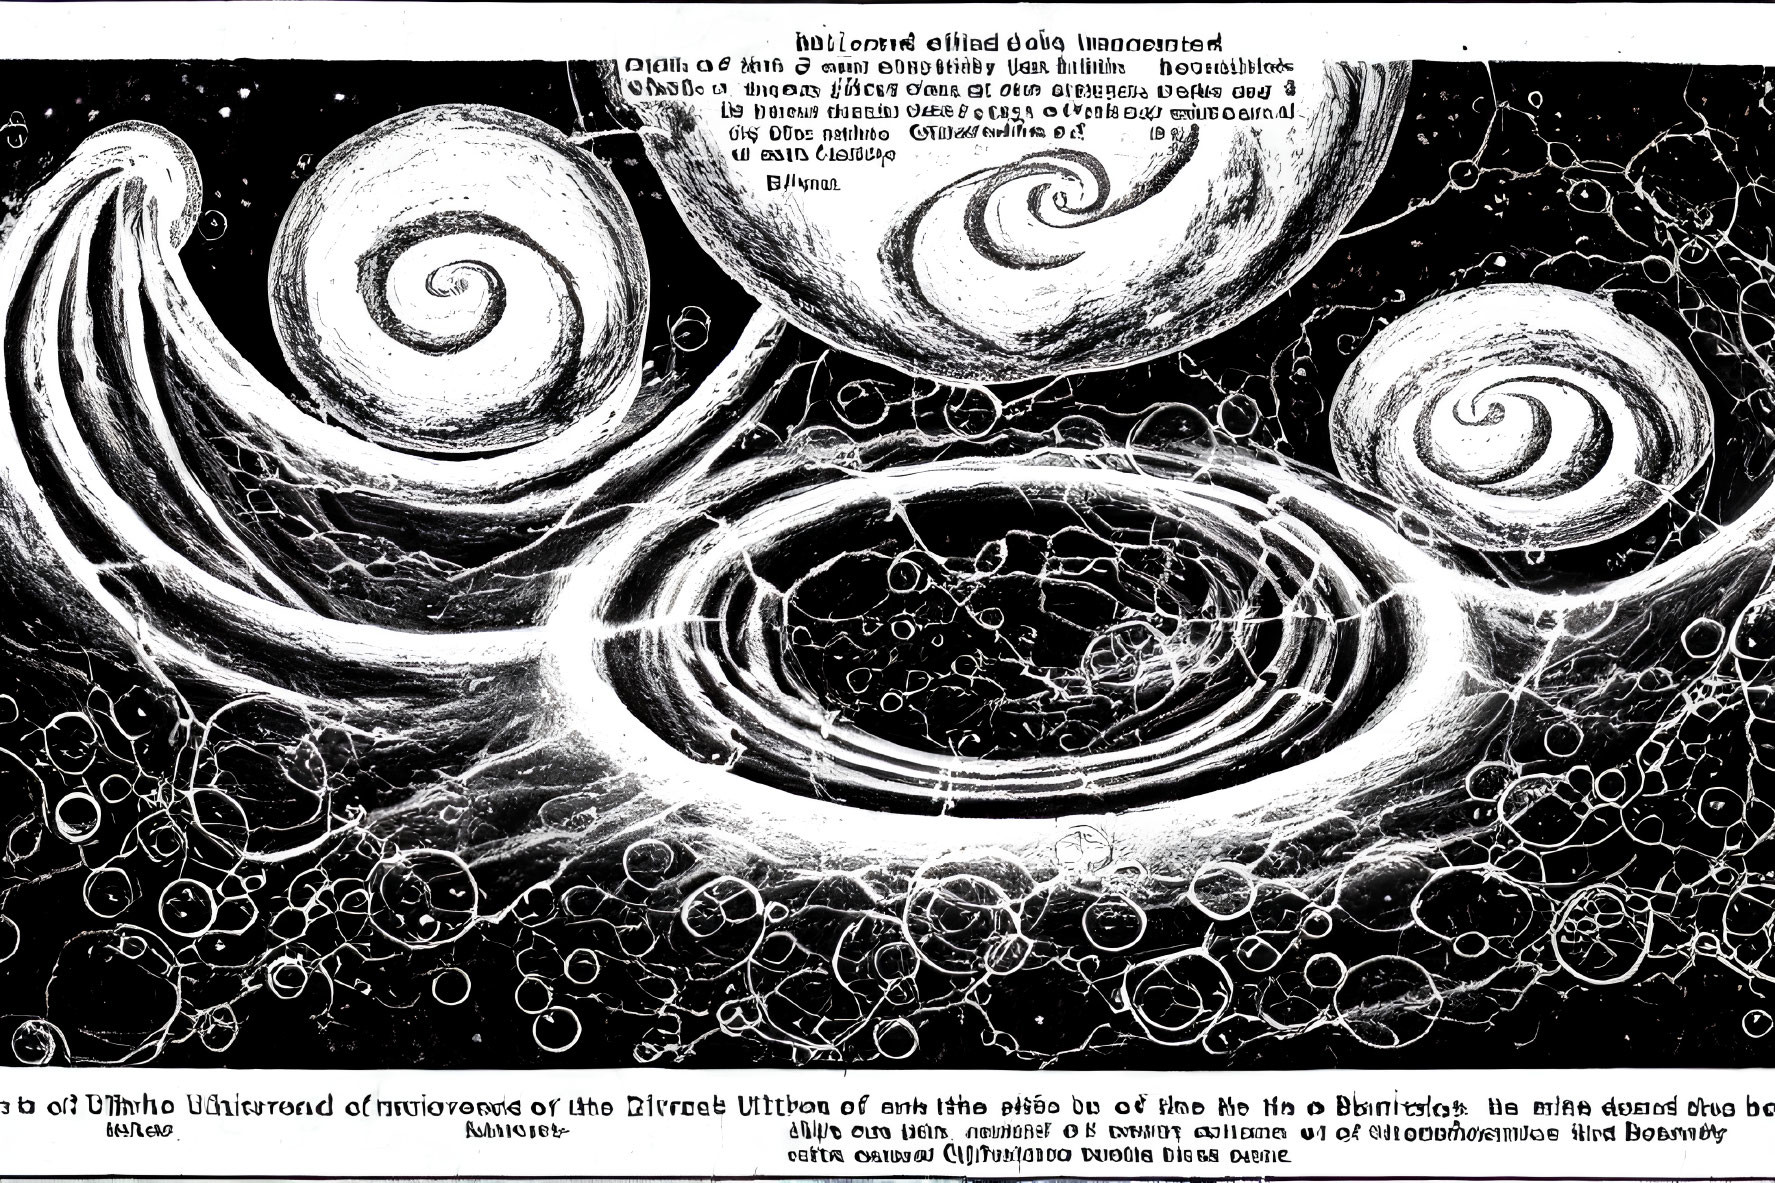 Abstract black and white drawing with swirling patterns and circles of various sizes